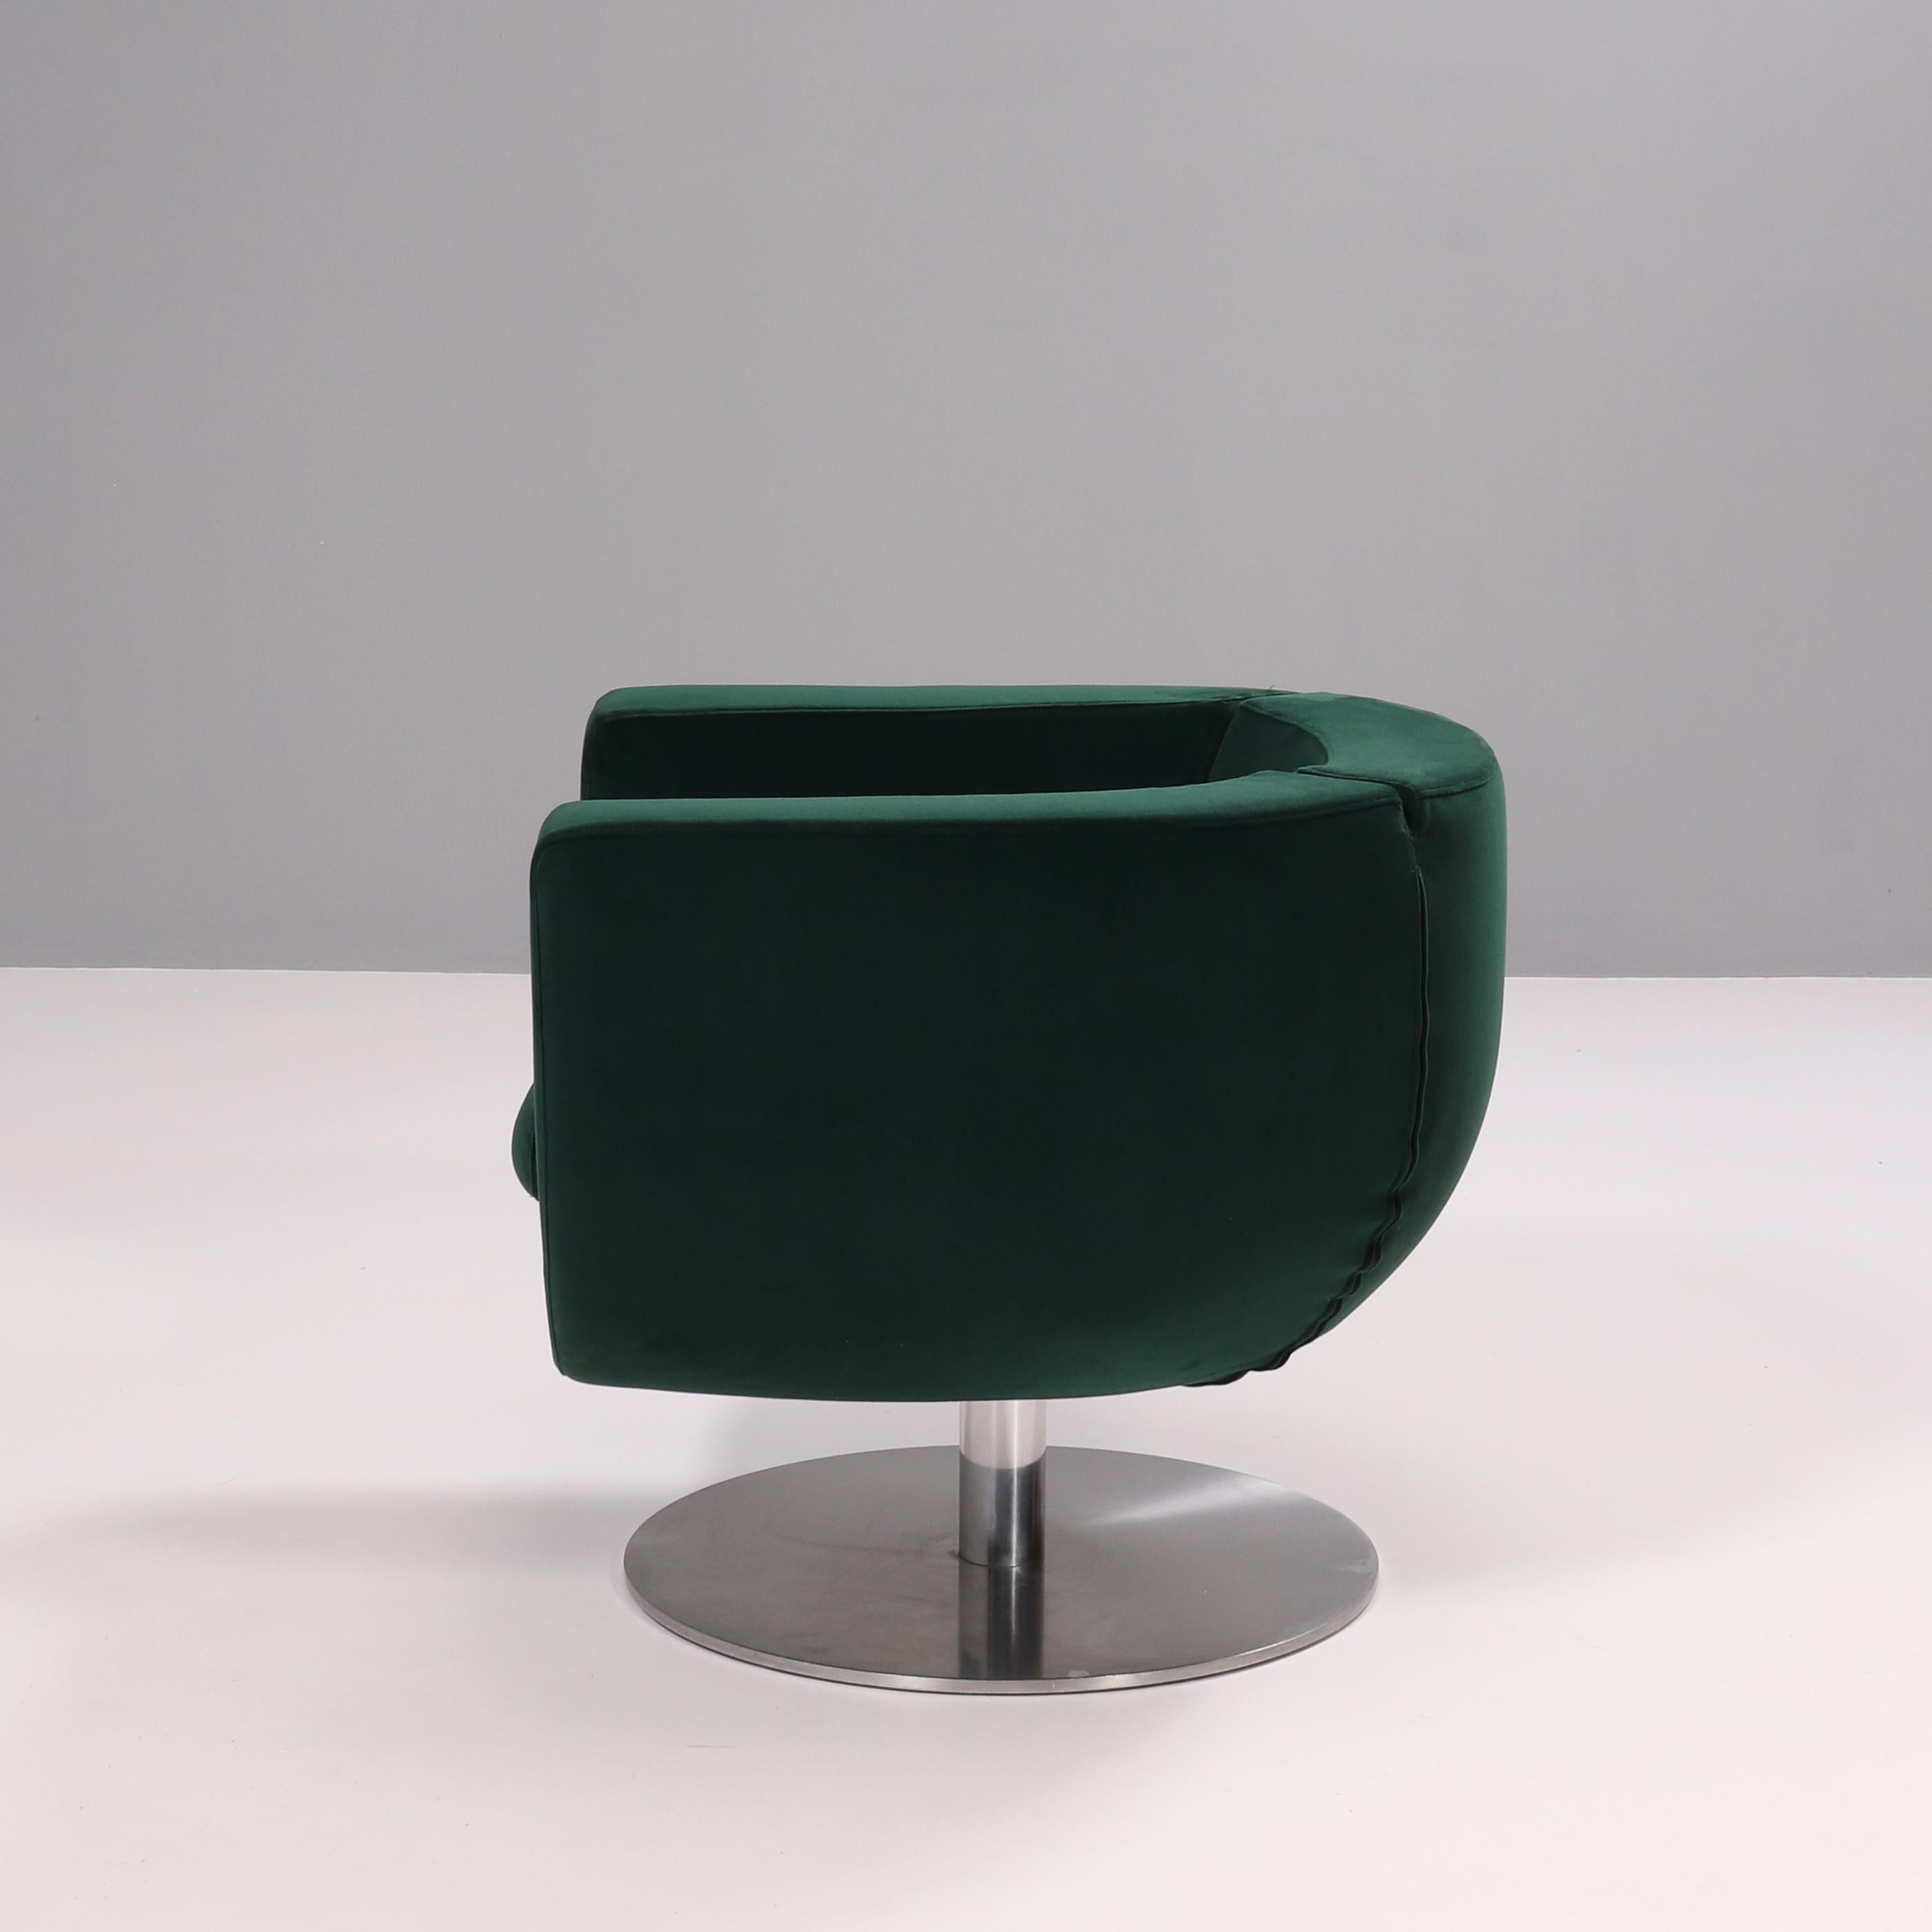 Designed by Jeffrey Bernett for B&B Italia in 2000, the Tulip armchair balances soft curves with sleek straight lines to create a timeless design.

Constructed with a tubular steel frame, the chair swivels 360 degrees on the brushed aluminium